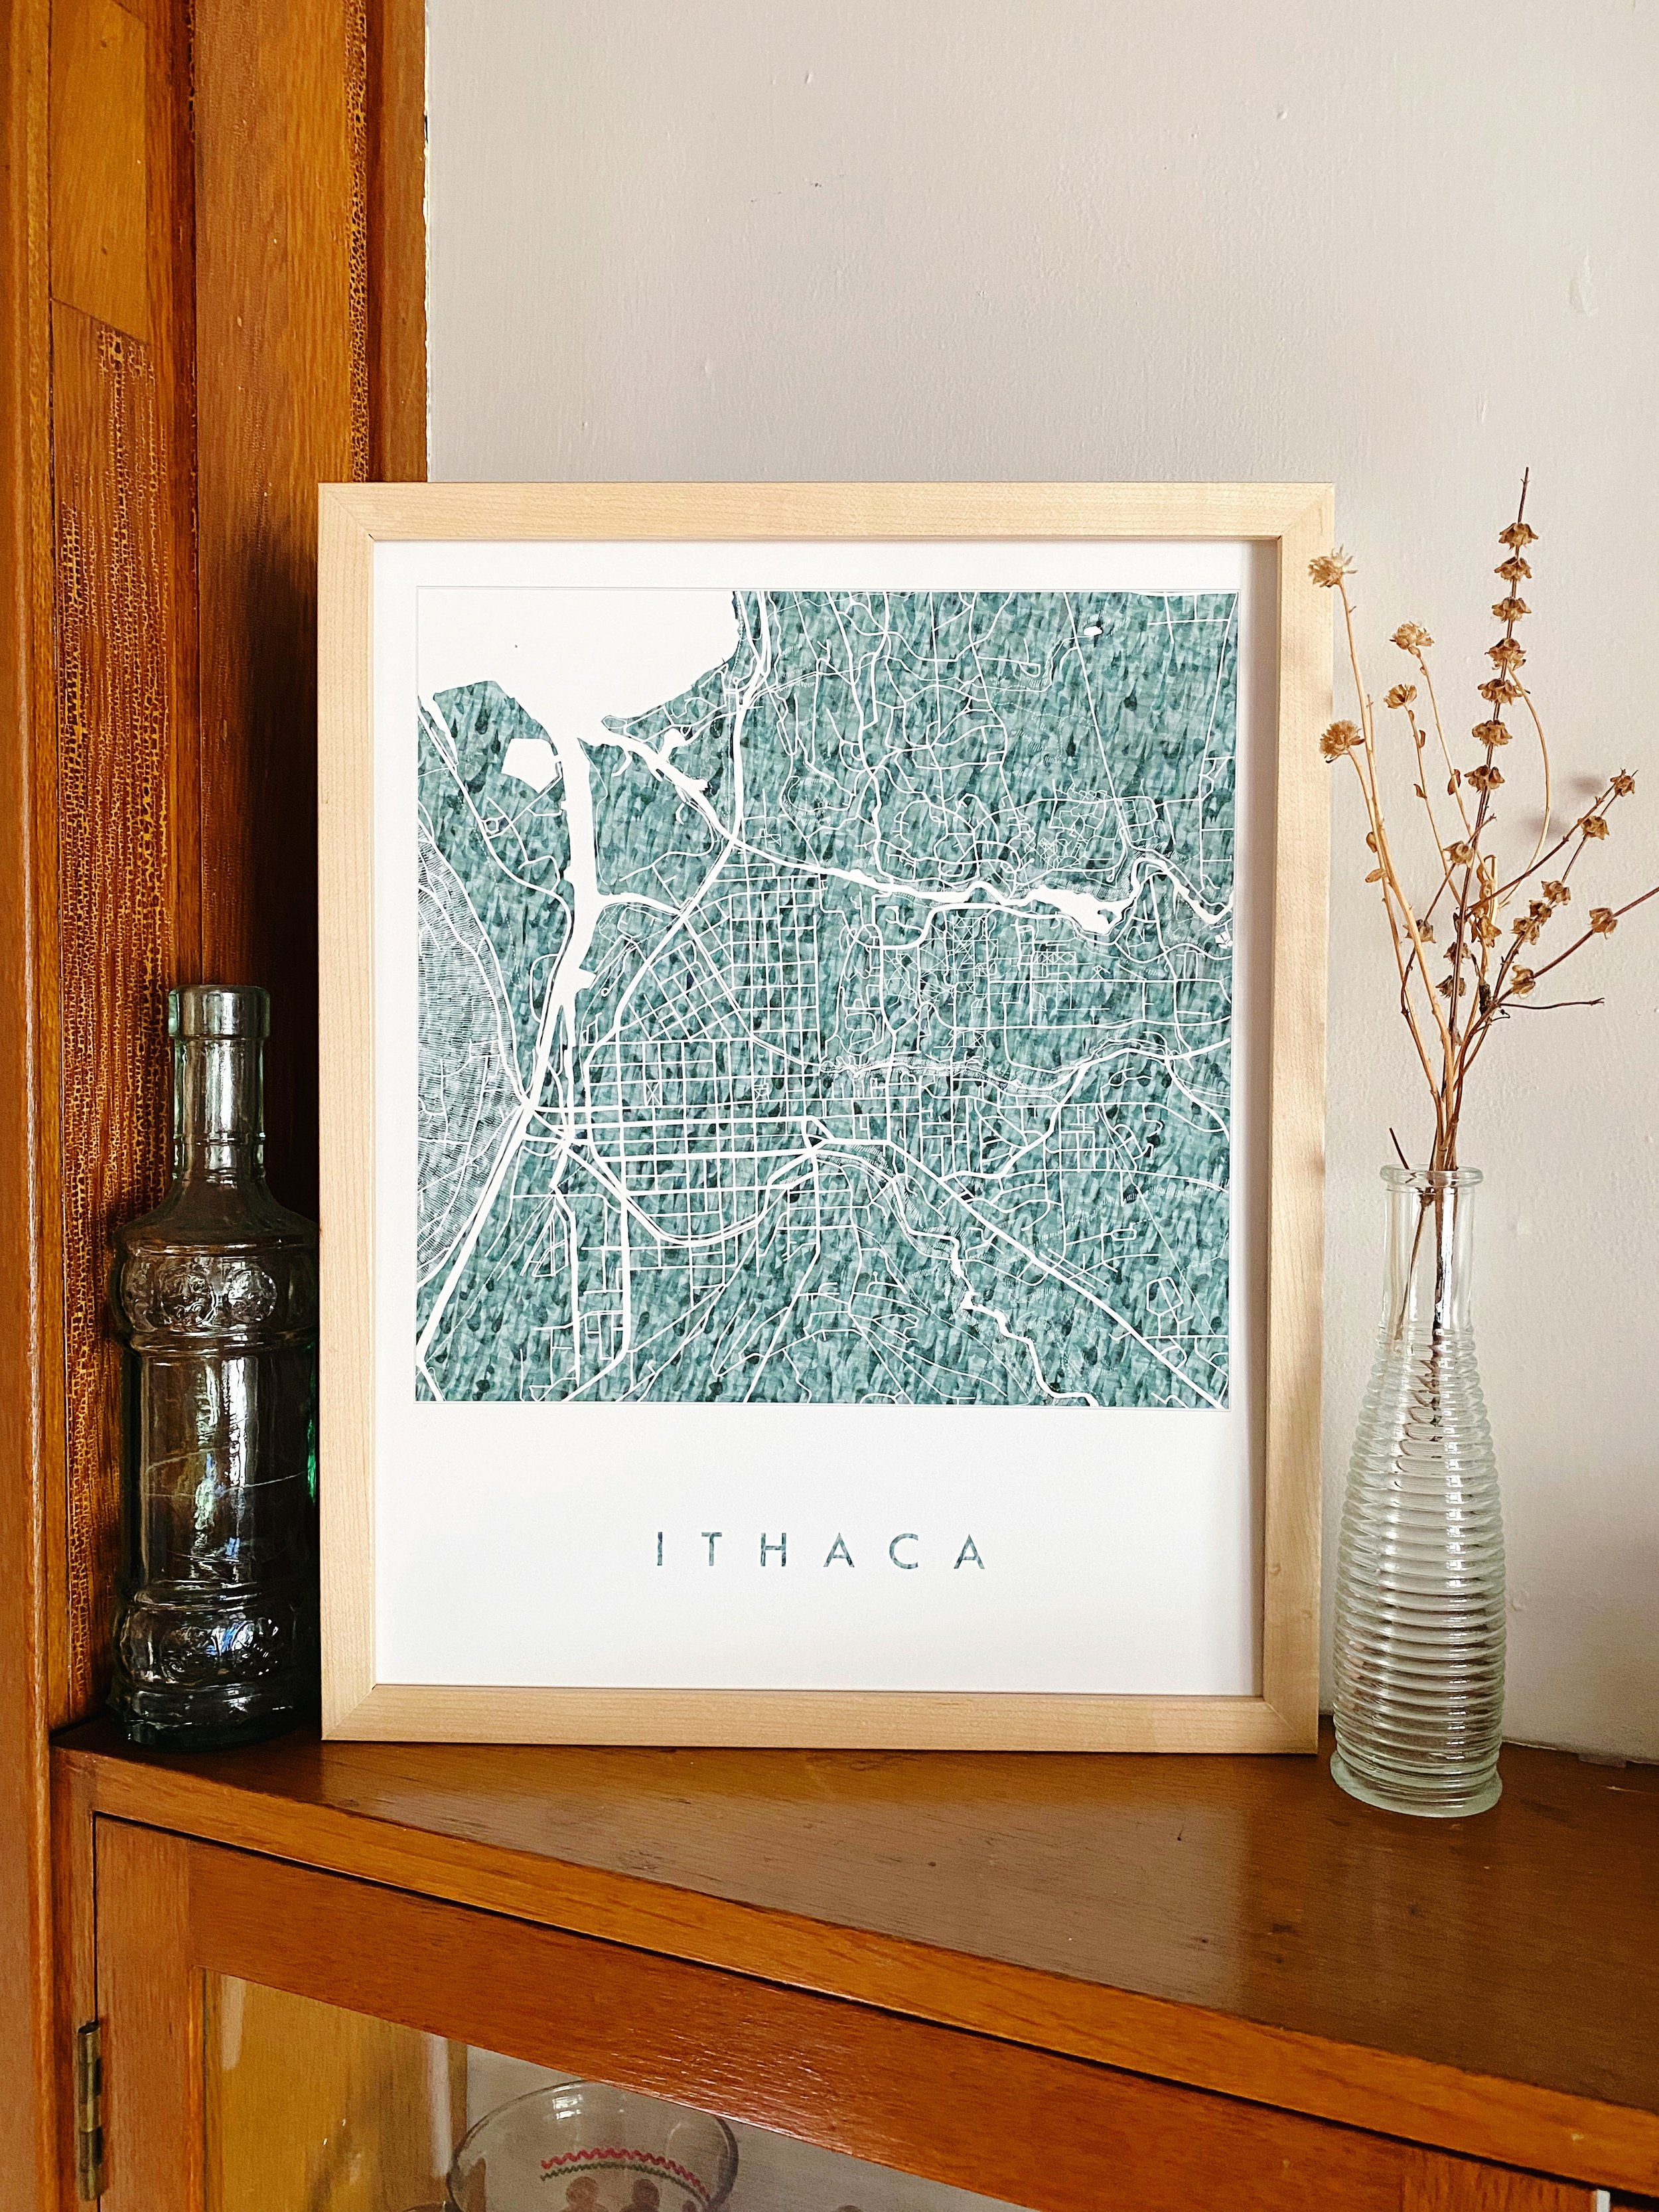 ITHACA New York Topgraphical Watercolor Map: PRINT